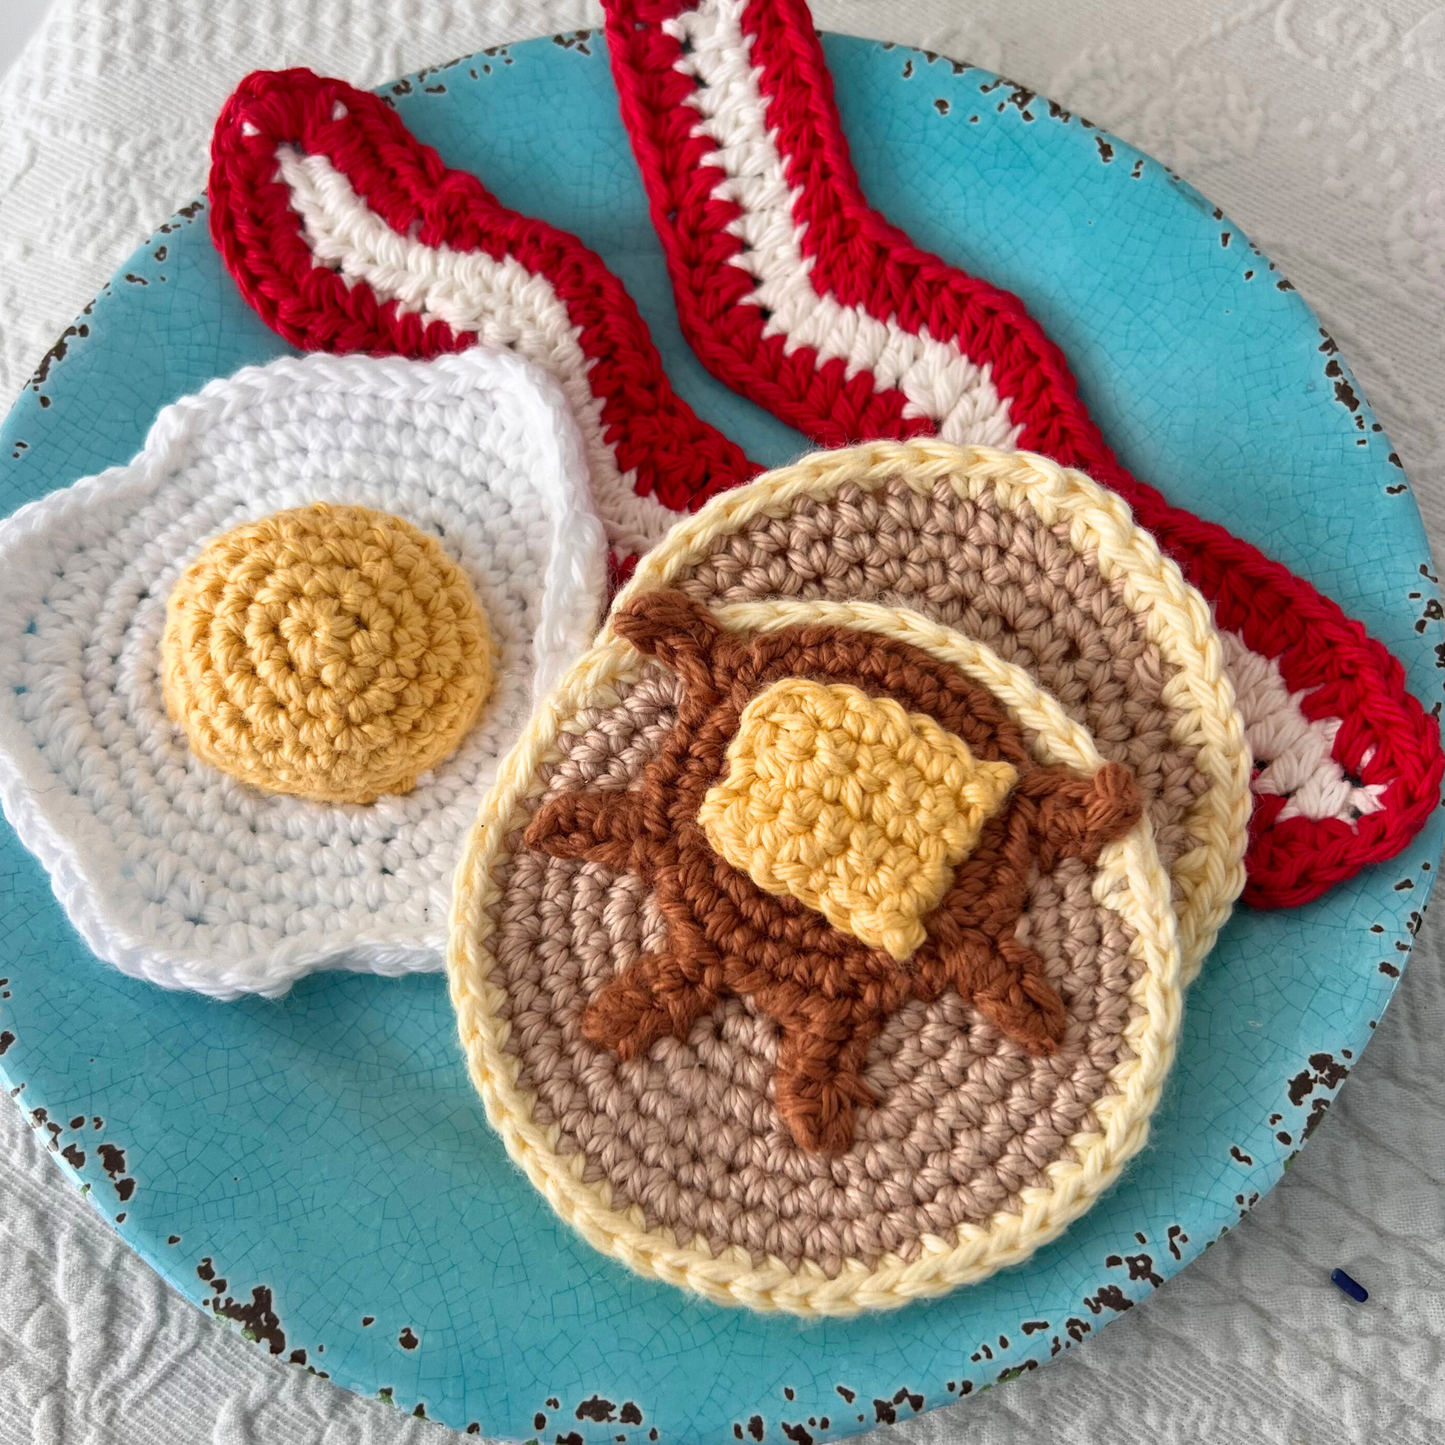 Breakfast Play Food Set.  5 Piece Crochet Play Food set with Egg, Pancakes & Bacon Amigurumi Set *READY to SHIP* Pretend Play Kitchen Food - FREE shipping to US